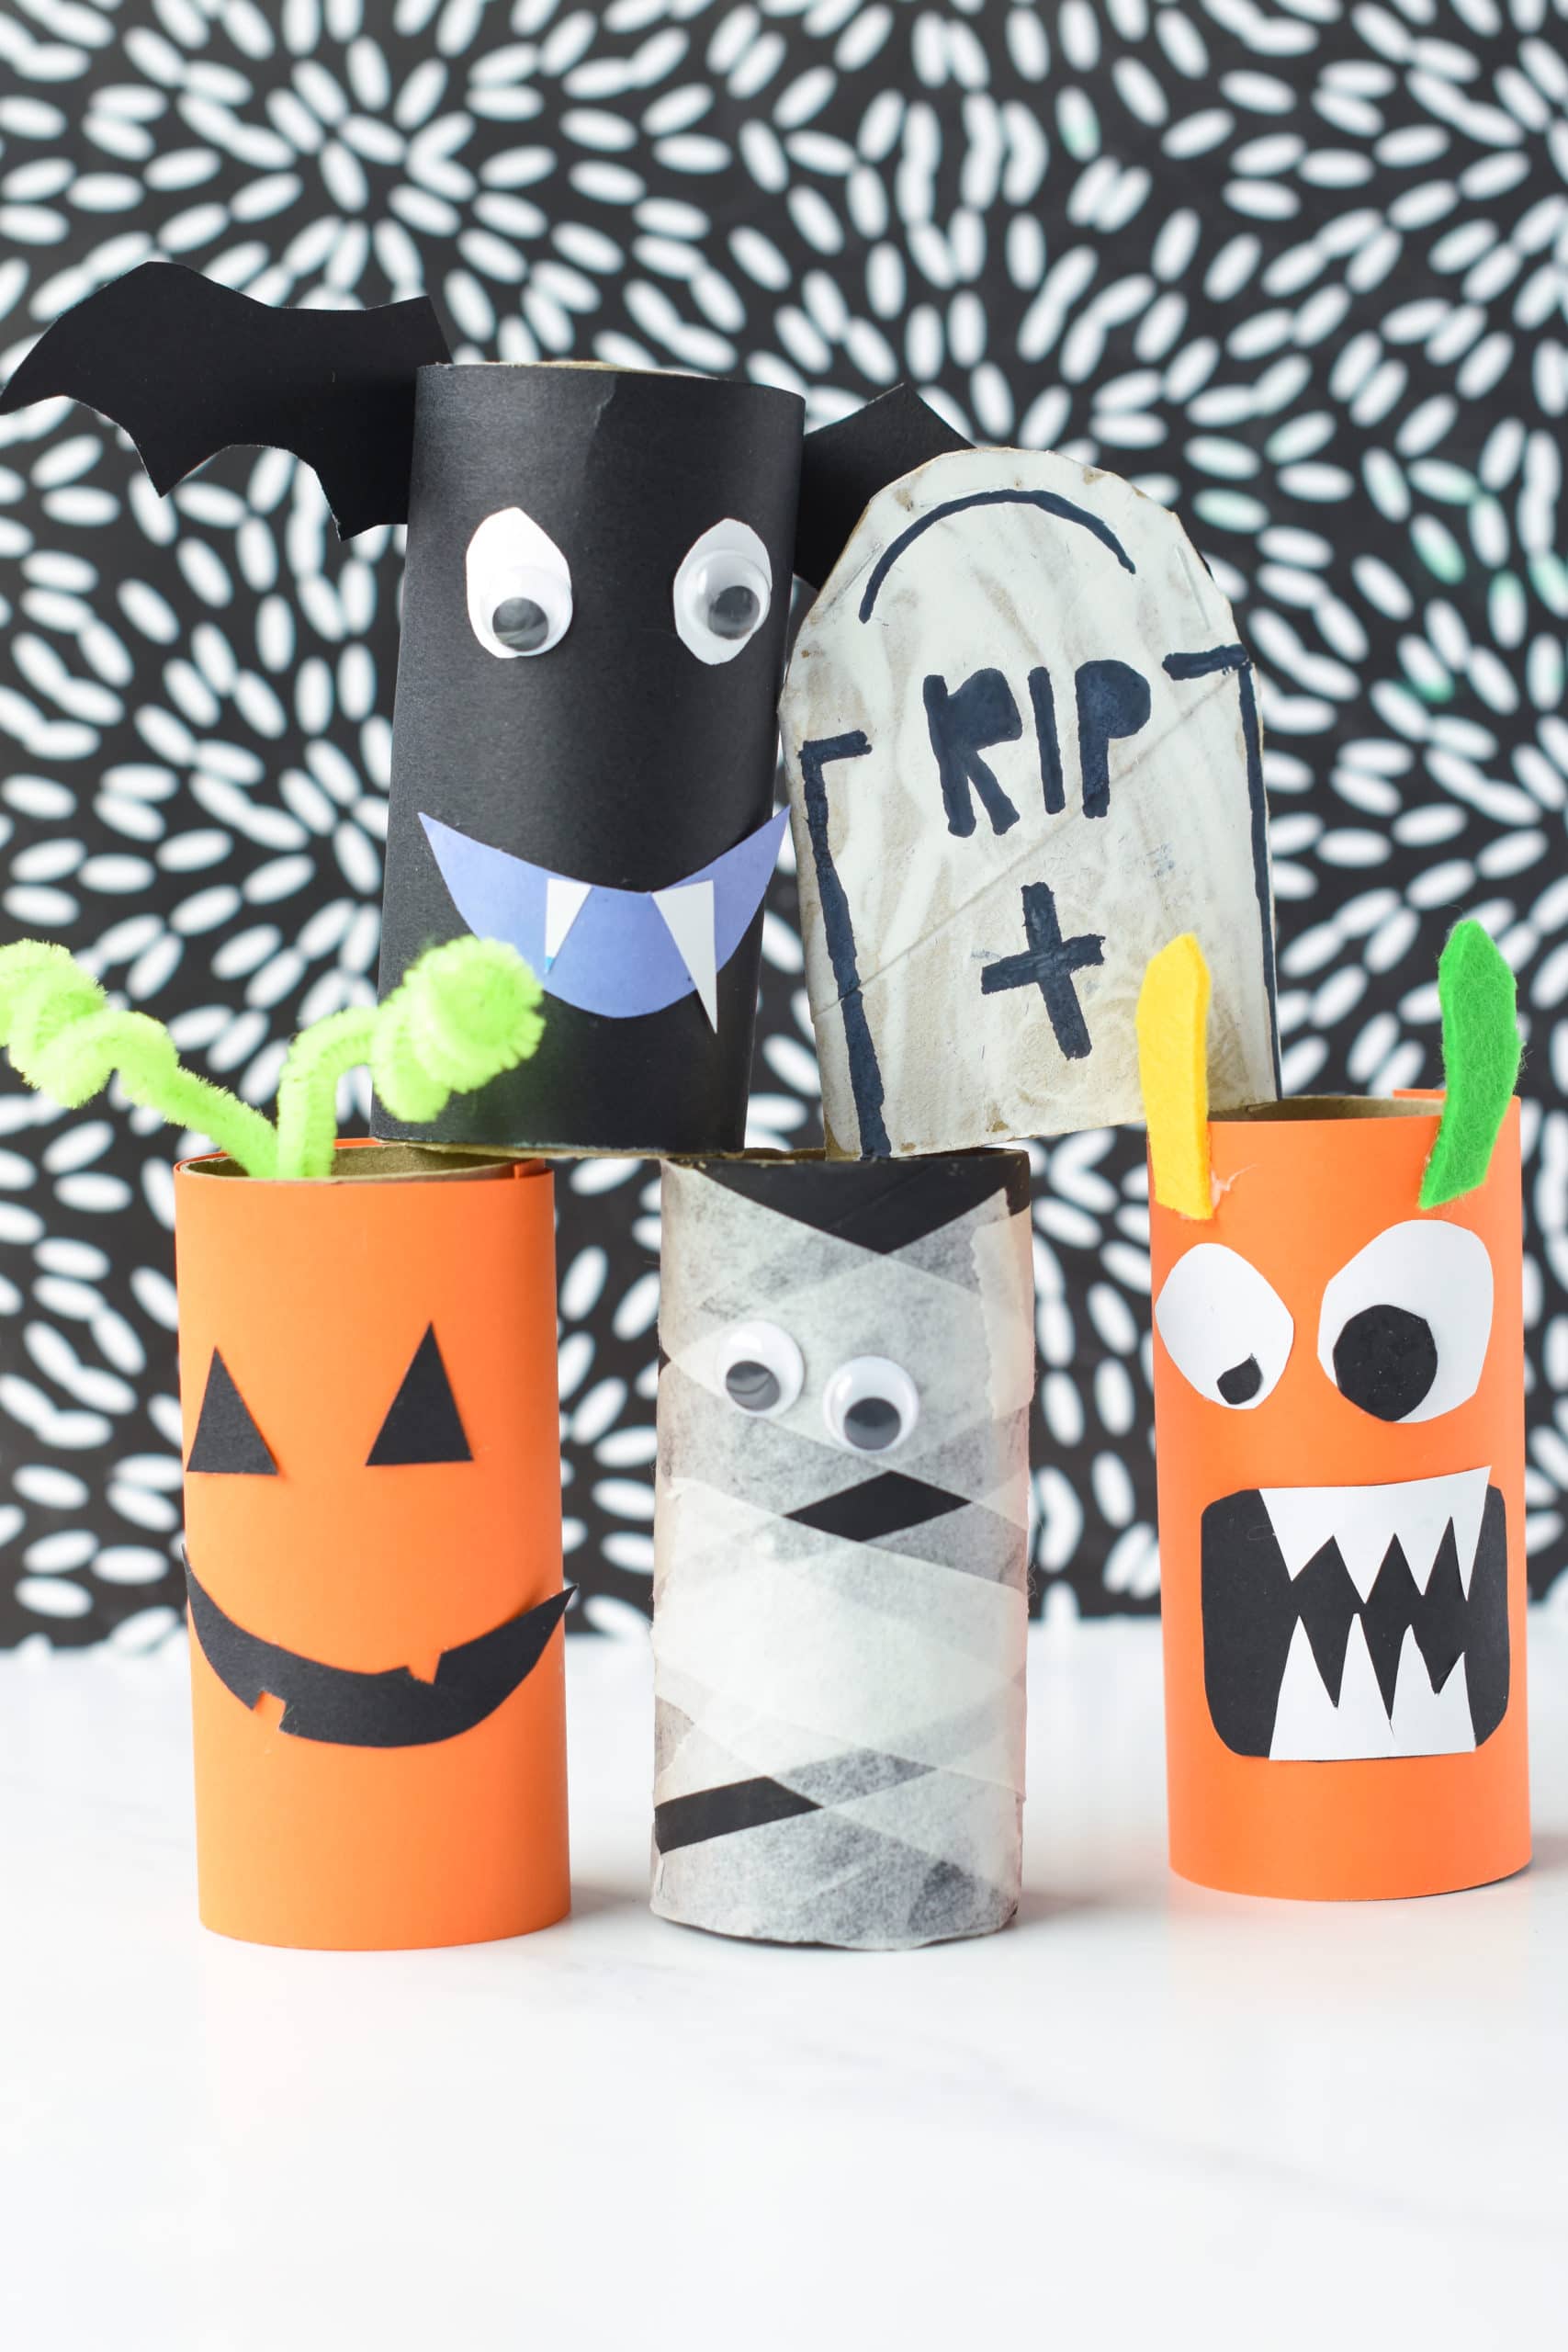 halloween Crafts with toilet paper rollshalloween Crafts with toilet paper rolls